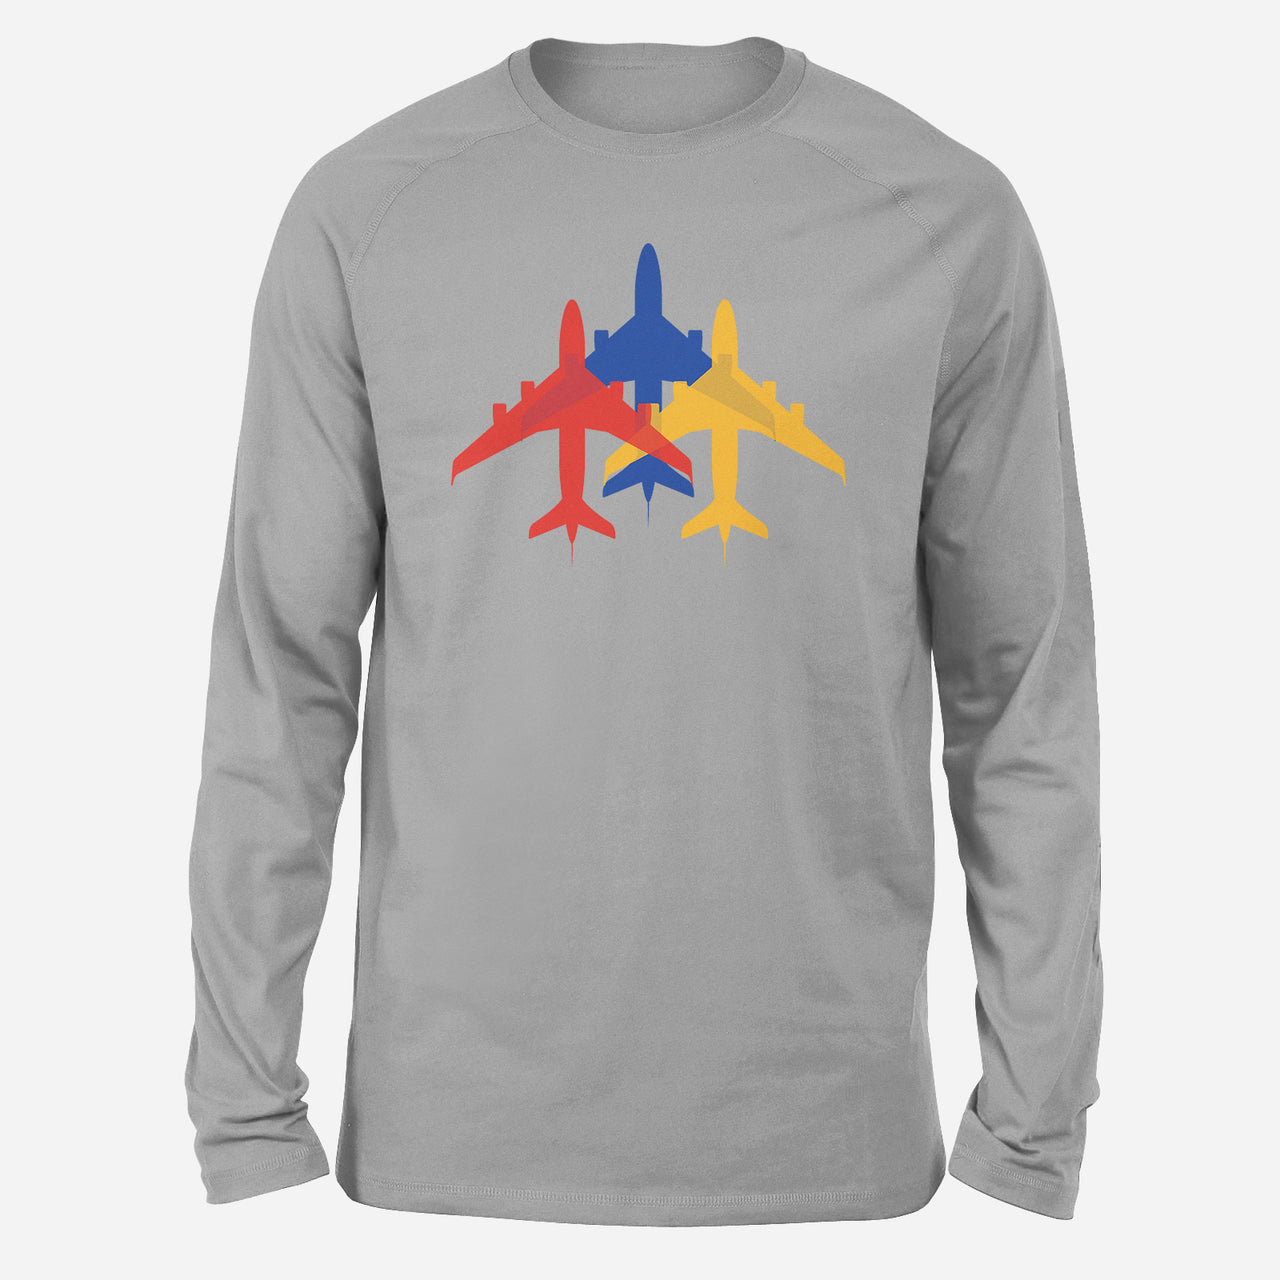 Colourful 3 Airplanes Designed Long-Sleeve T-Shirts